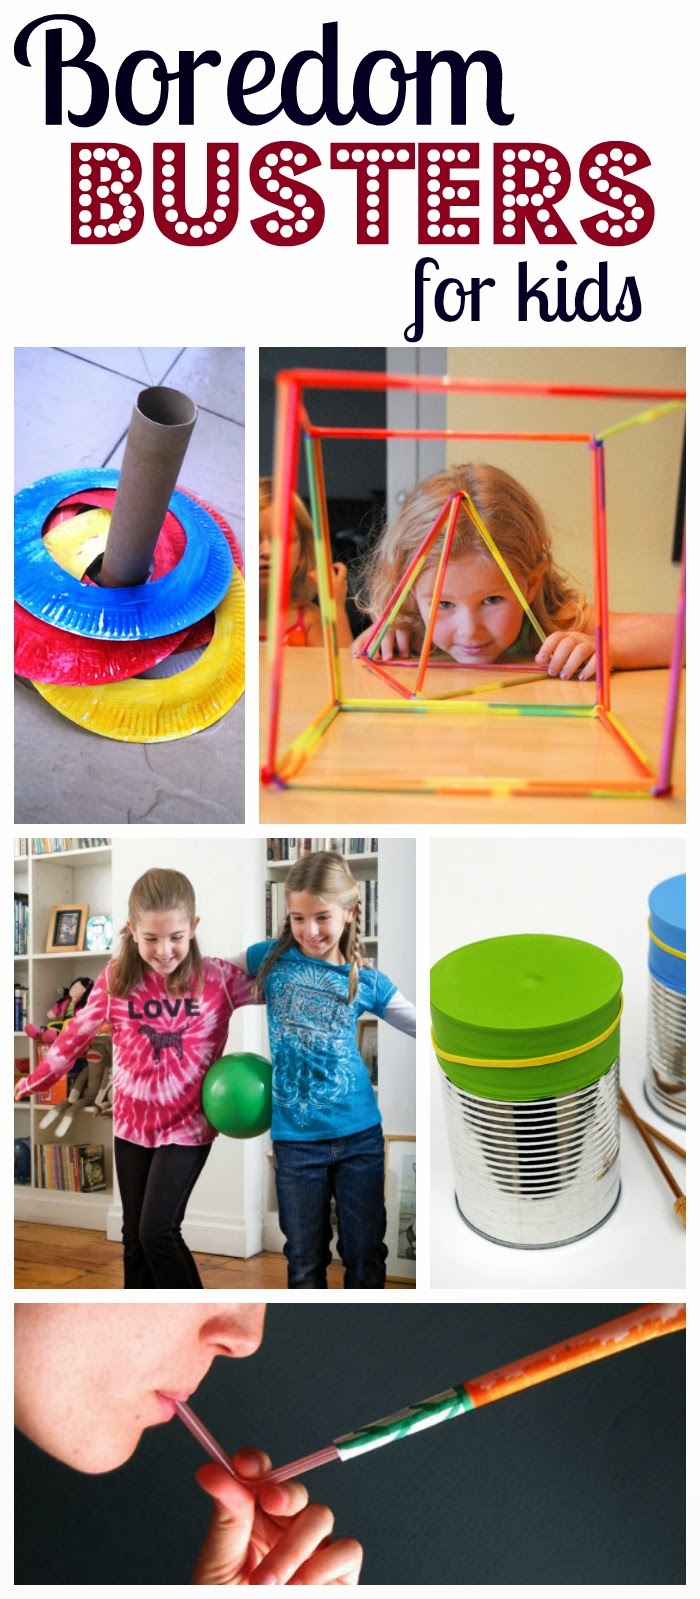 25 Cheap to FREE boredom busters to keep kids having fun and make mom's day easier!